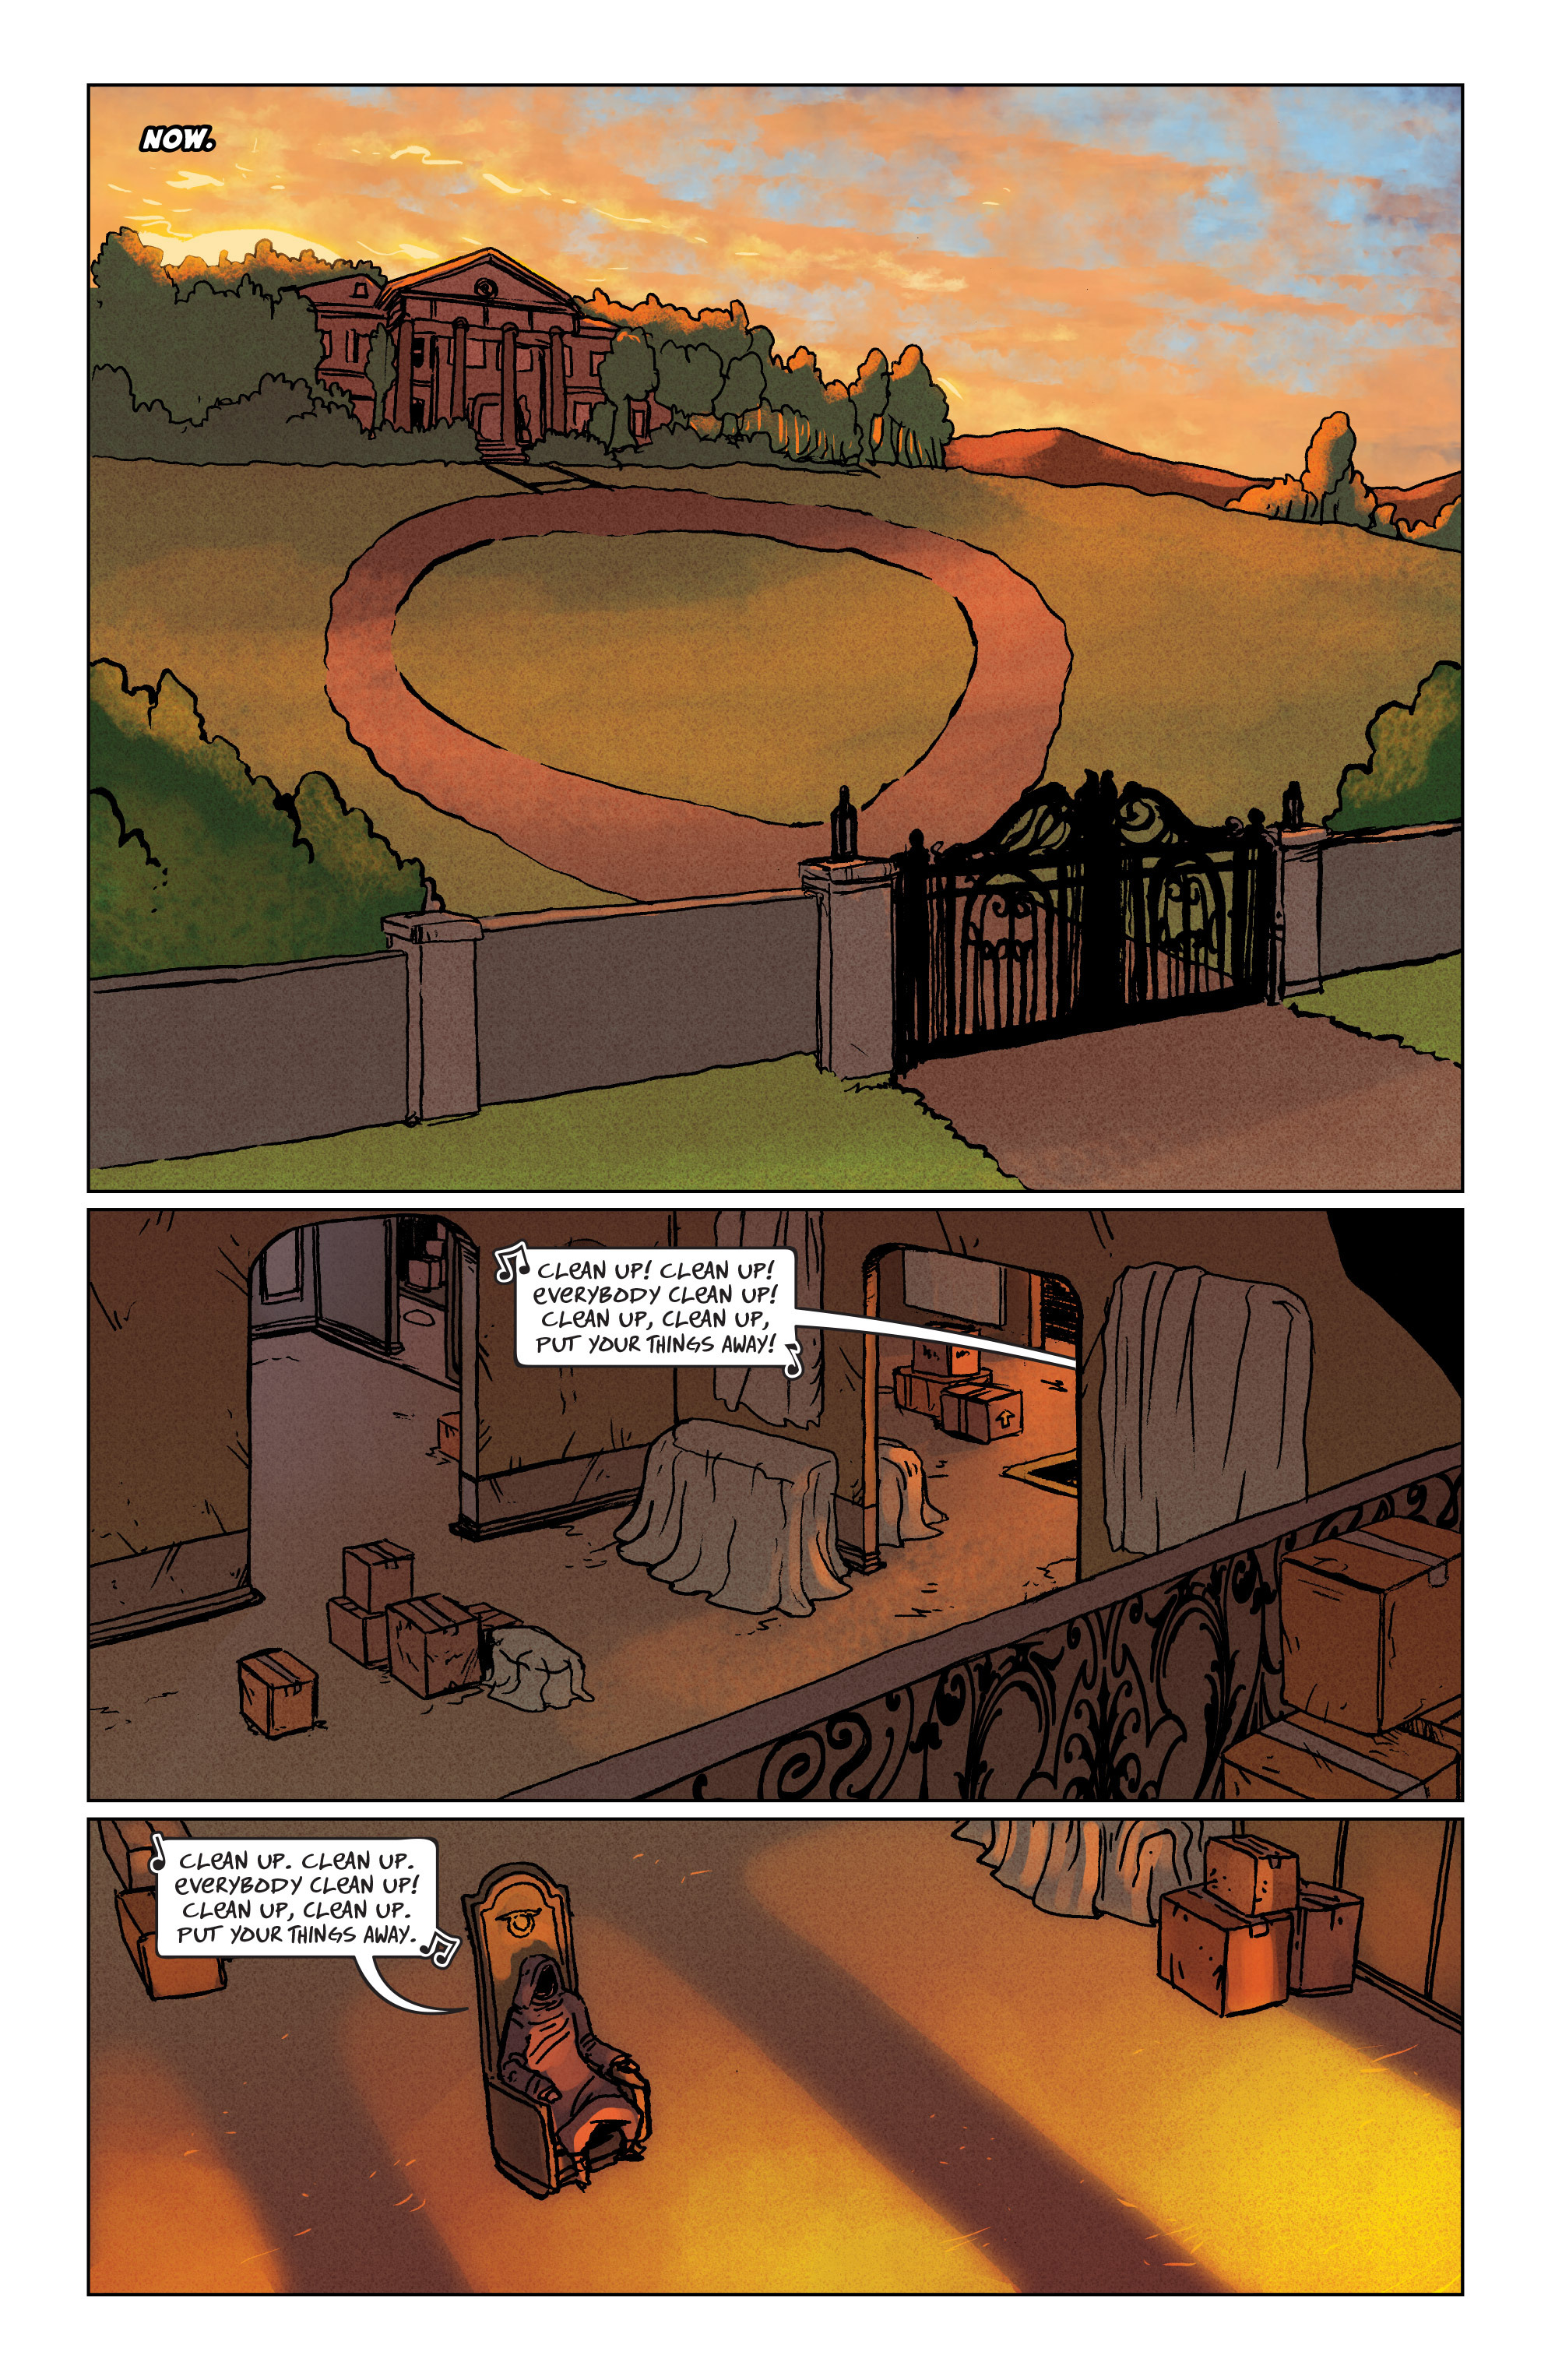 Exodus: The Life After (2015-): Chapter 9 - Page 3